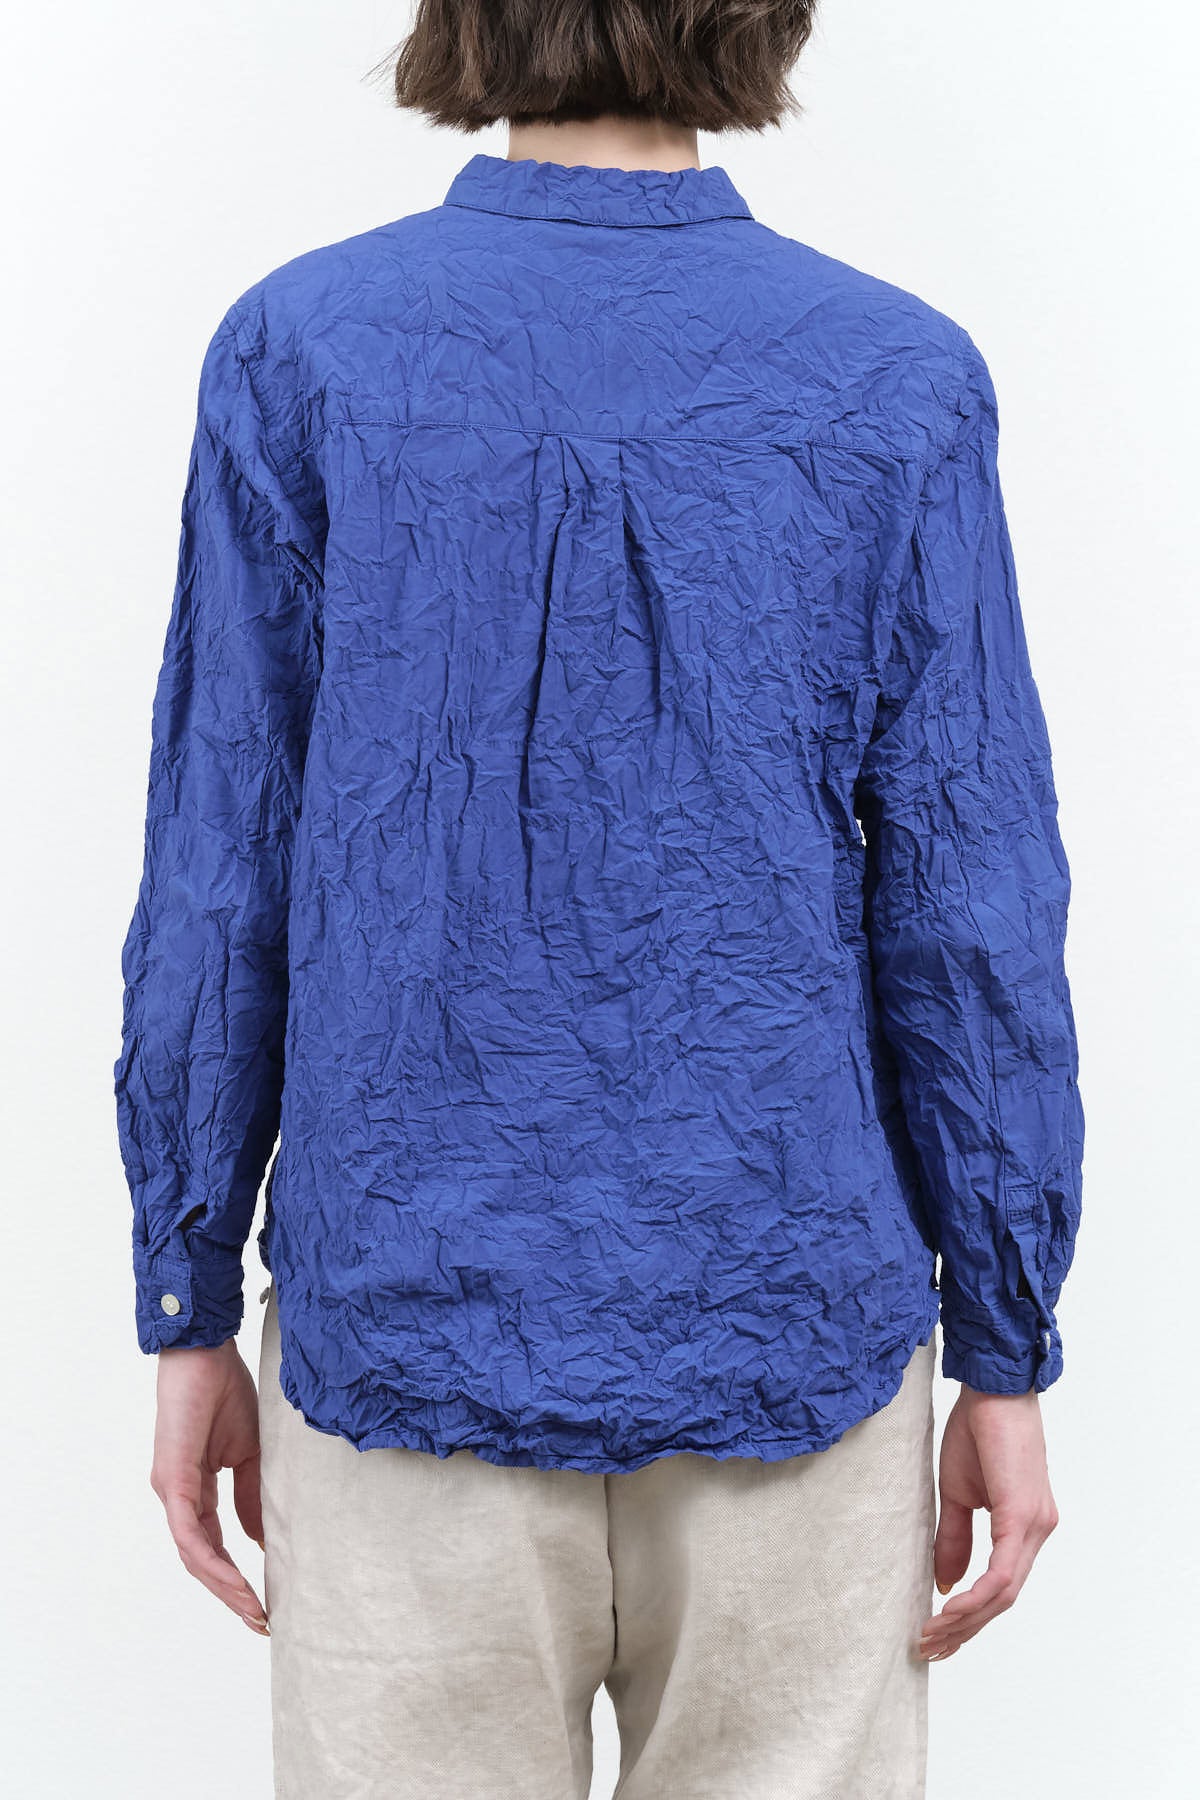 Back view of Natural Wine Dye Blouse